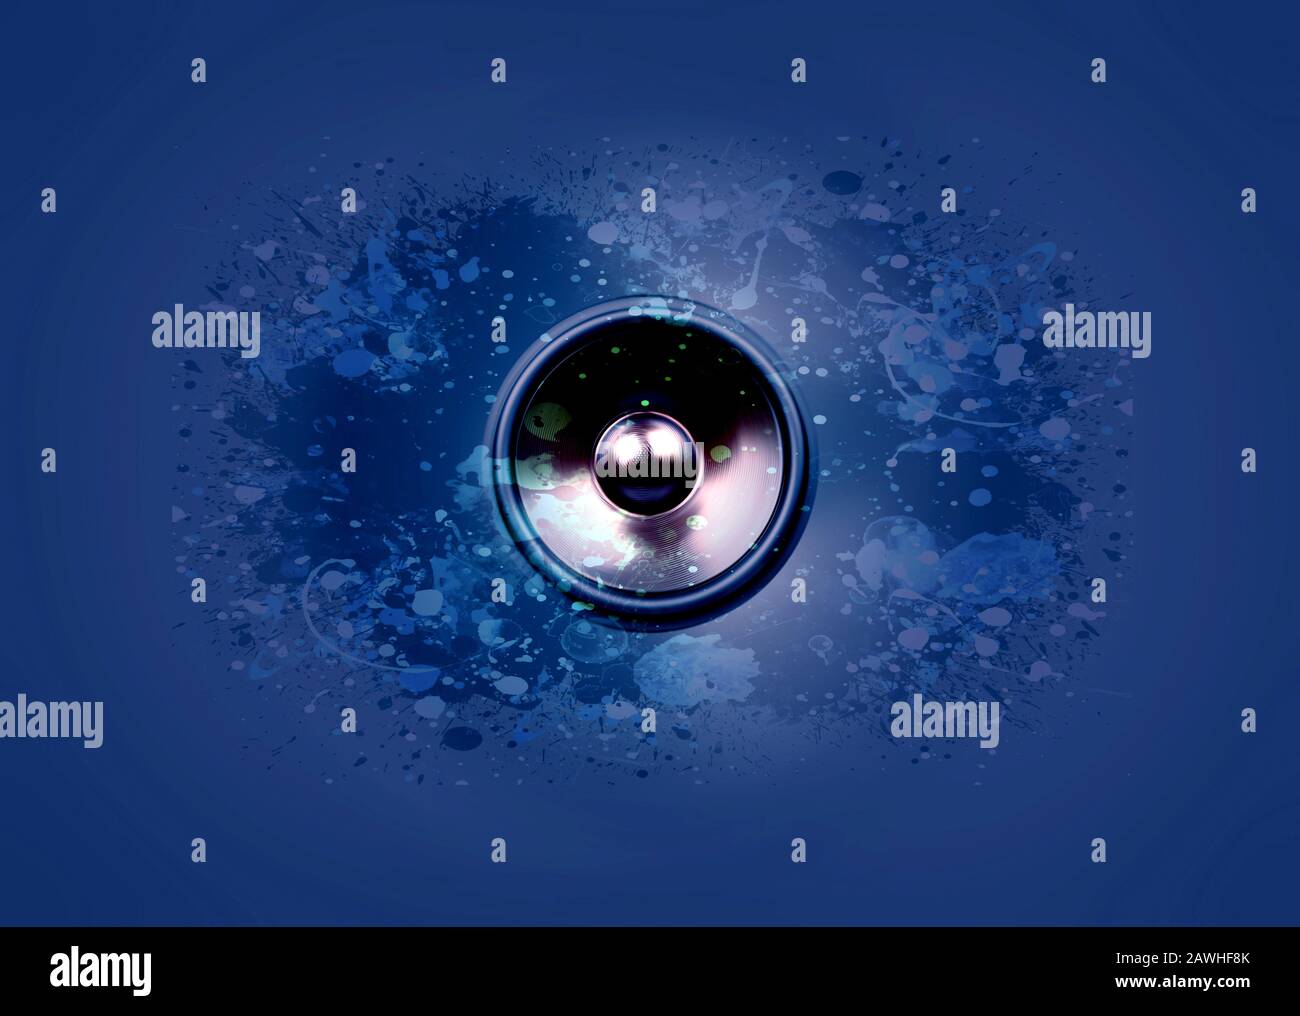 Spinning audio speaker on a dark blue background with paint splatters Stock Photo